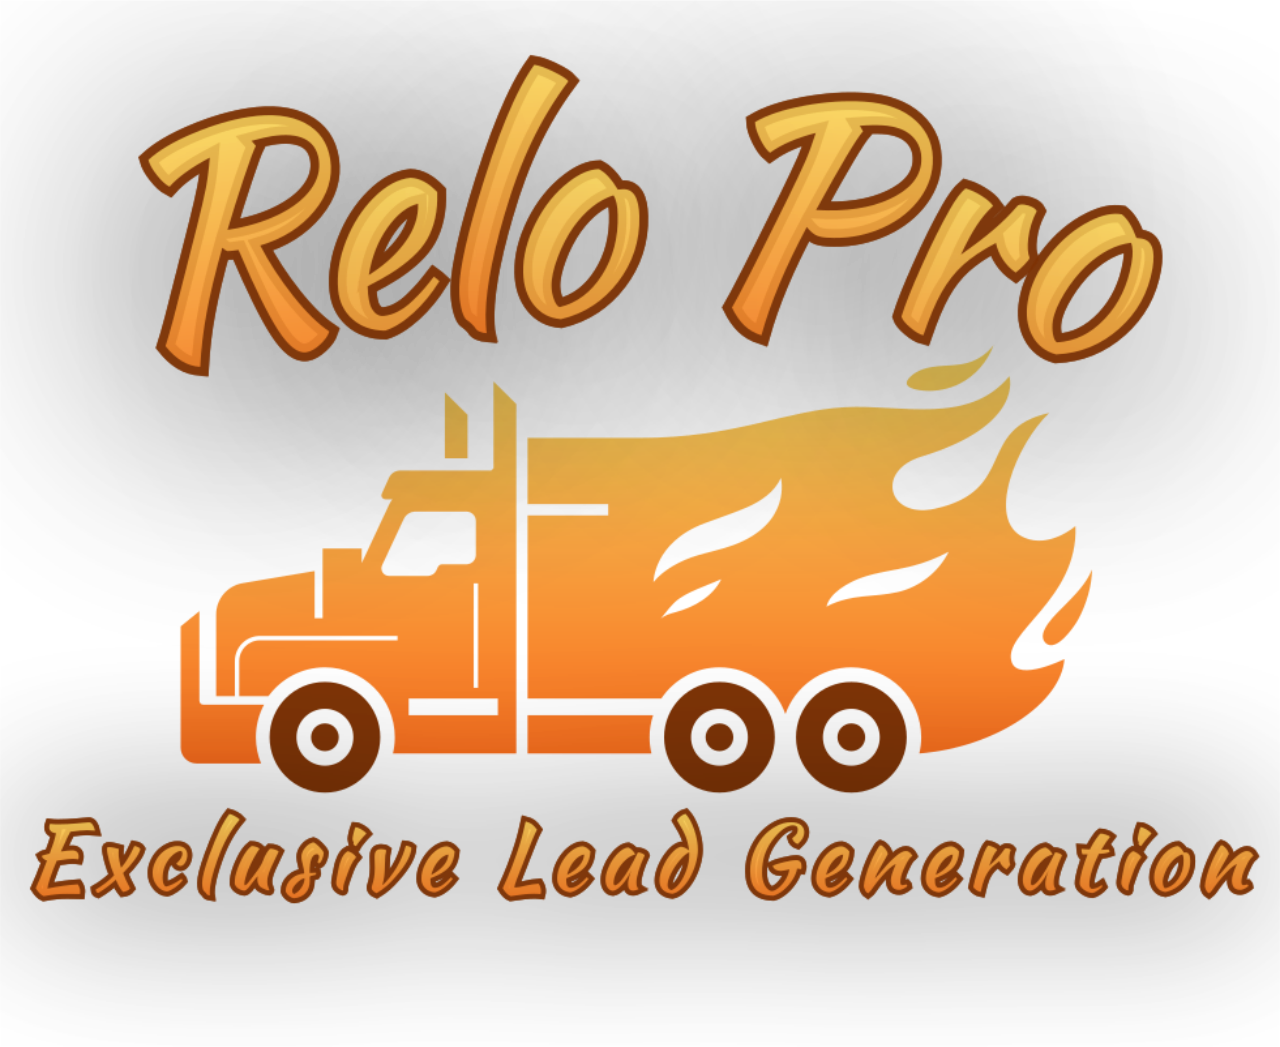 ReloPro Leads's web page